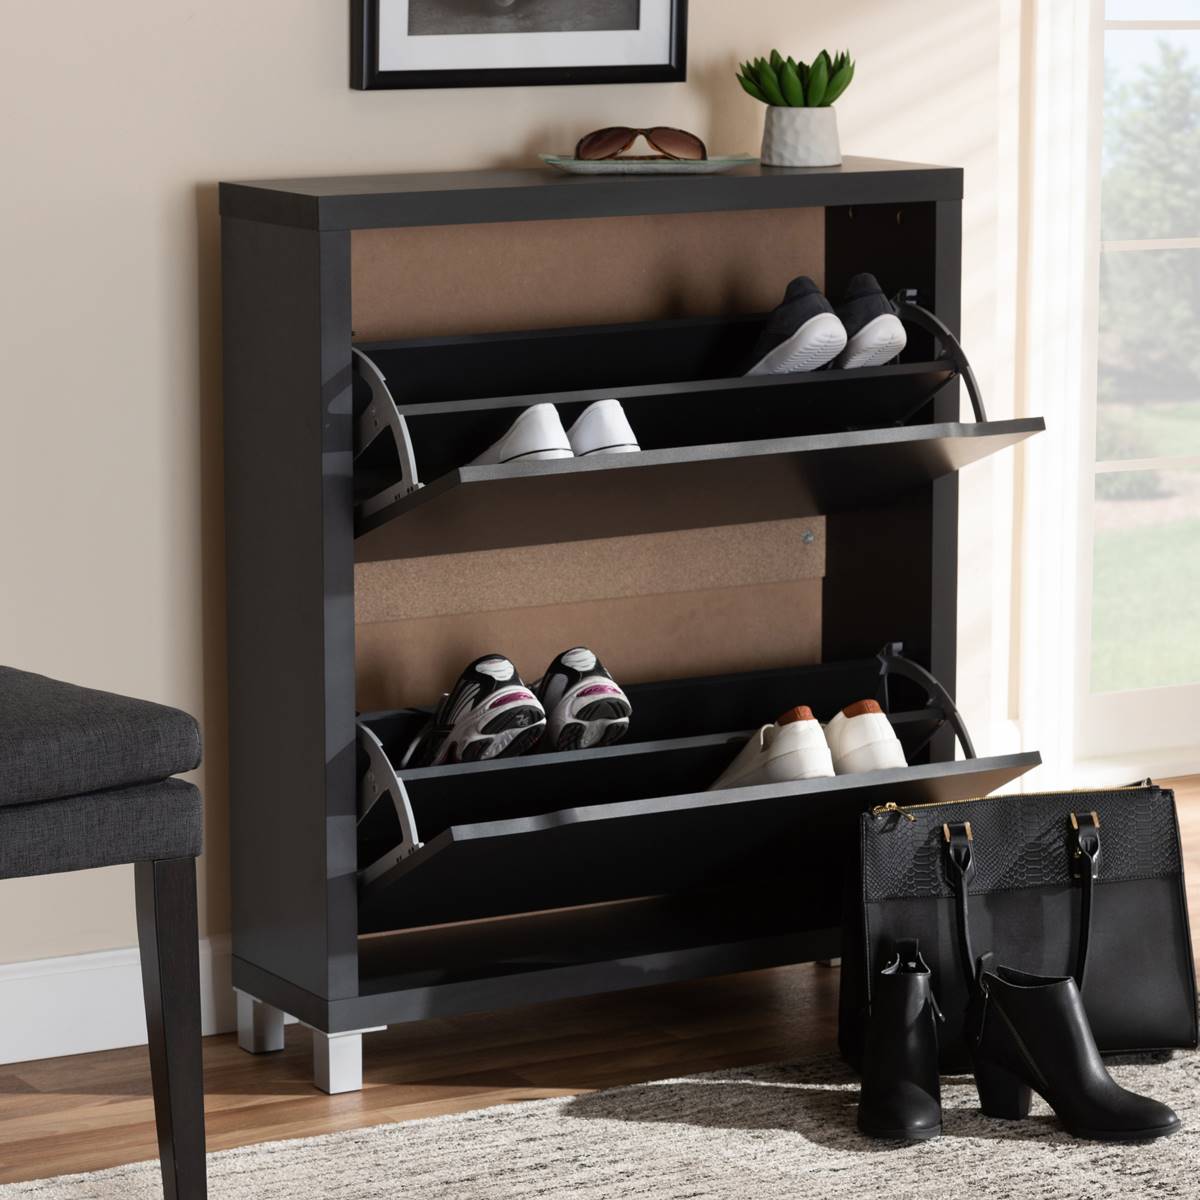 Baxton Studio Simms Shoe Storage Cabinet With 4 Fold Out Racks